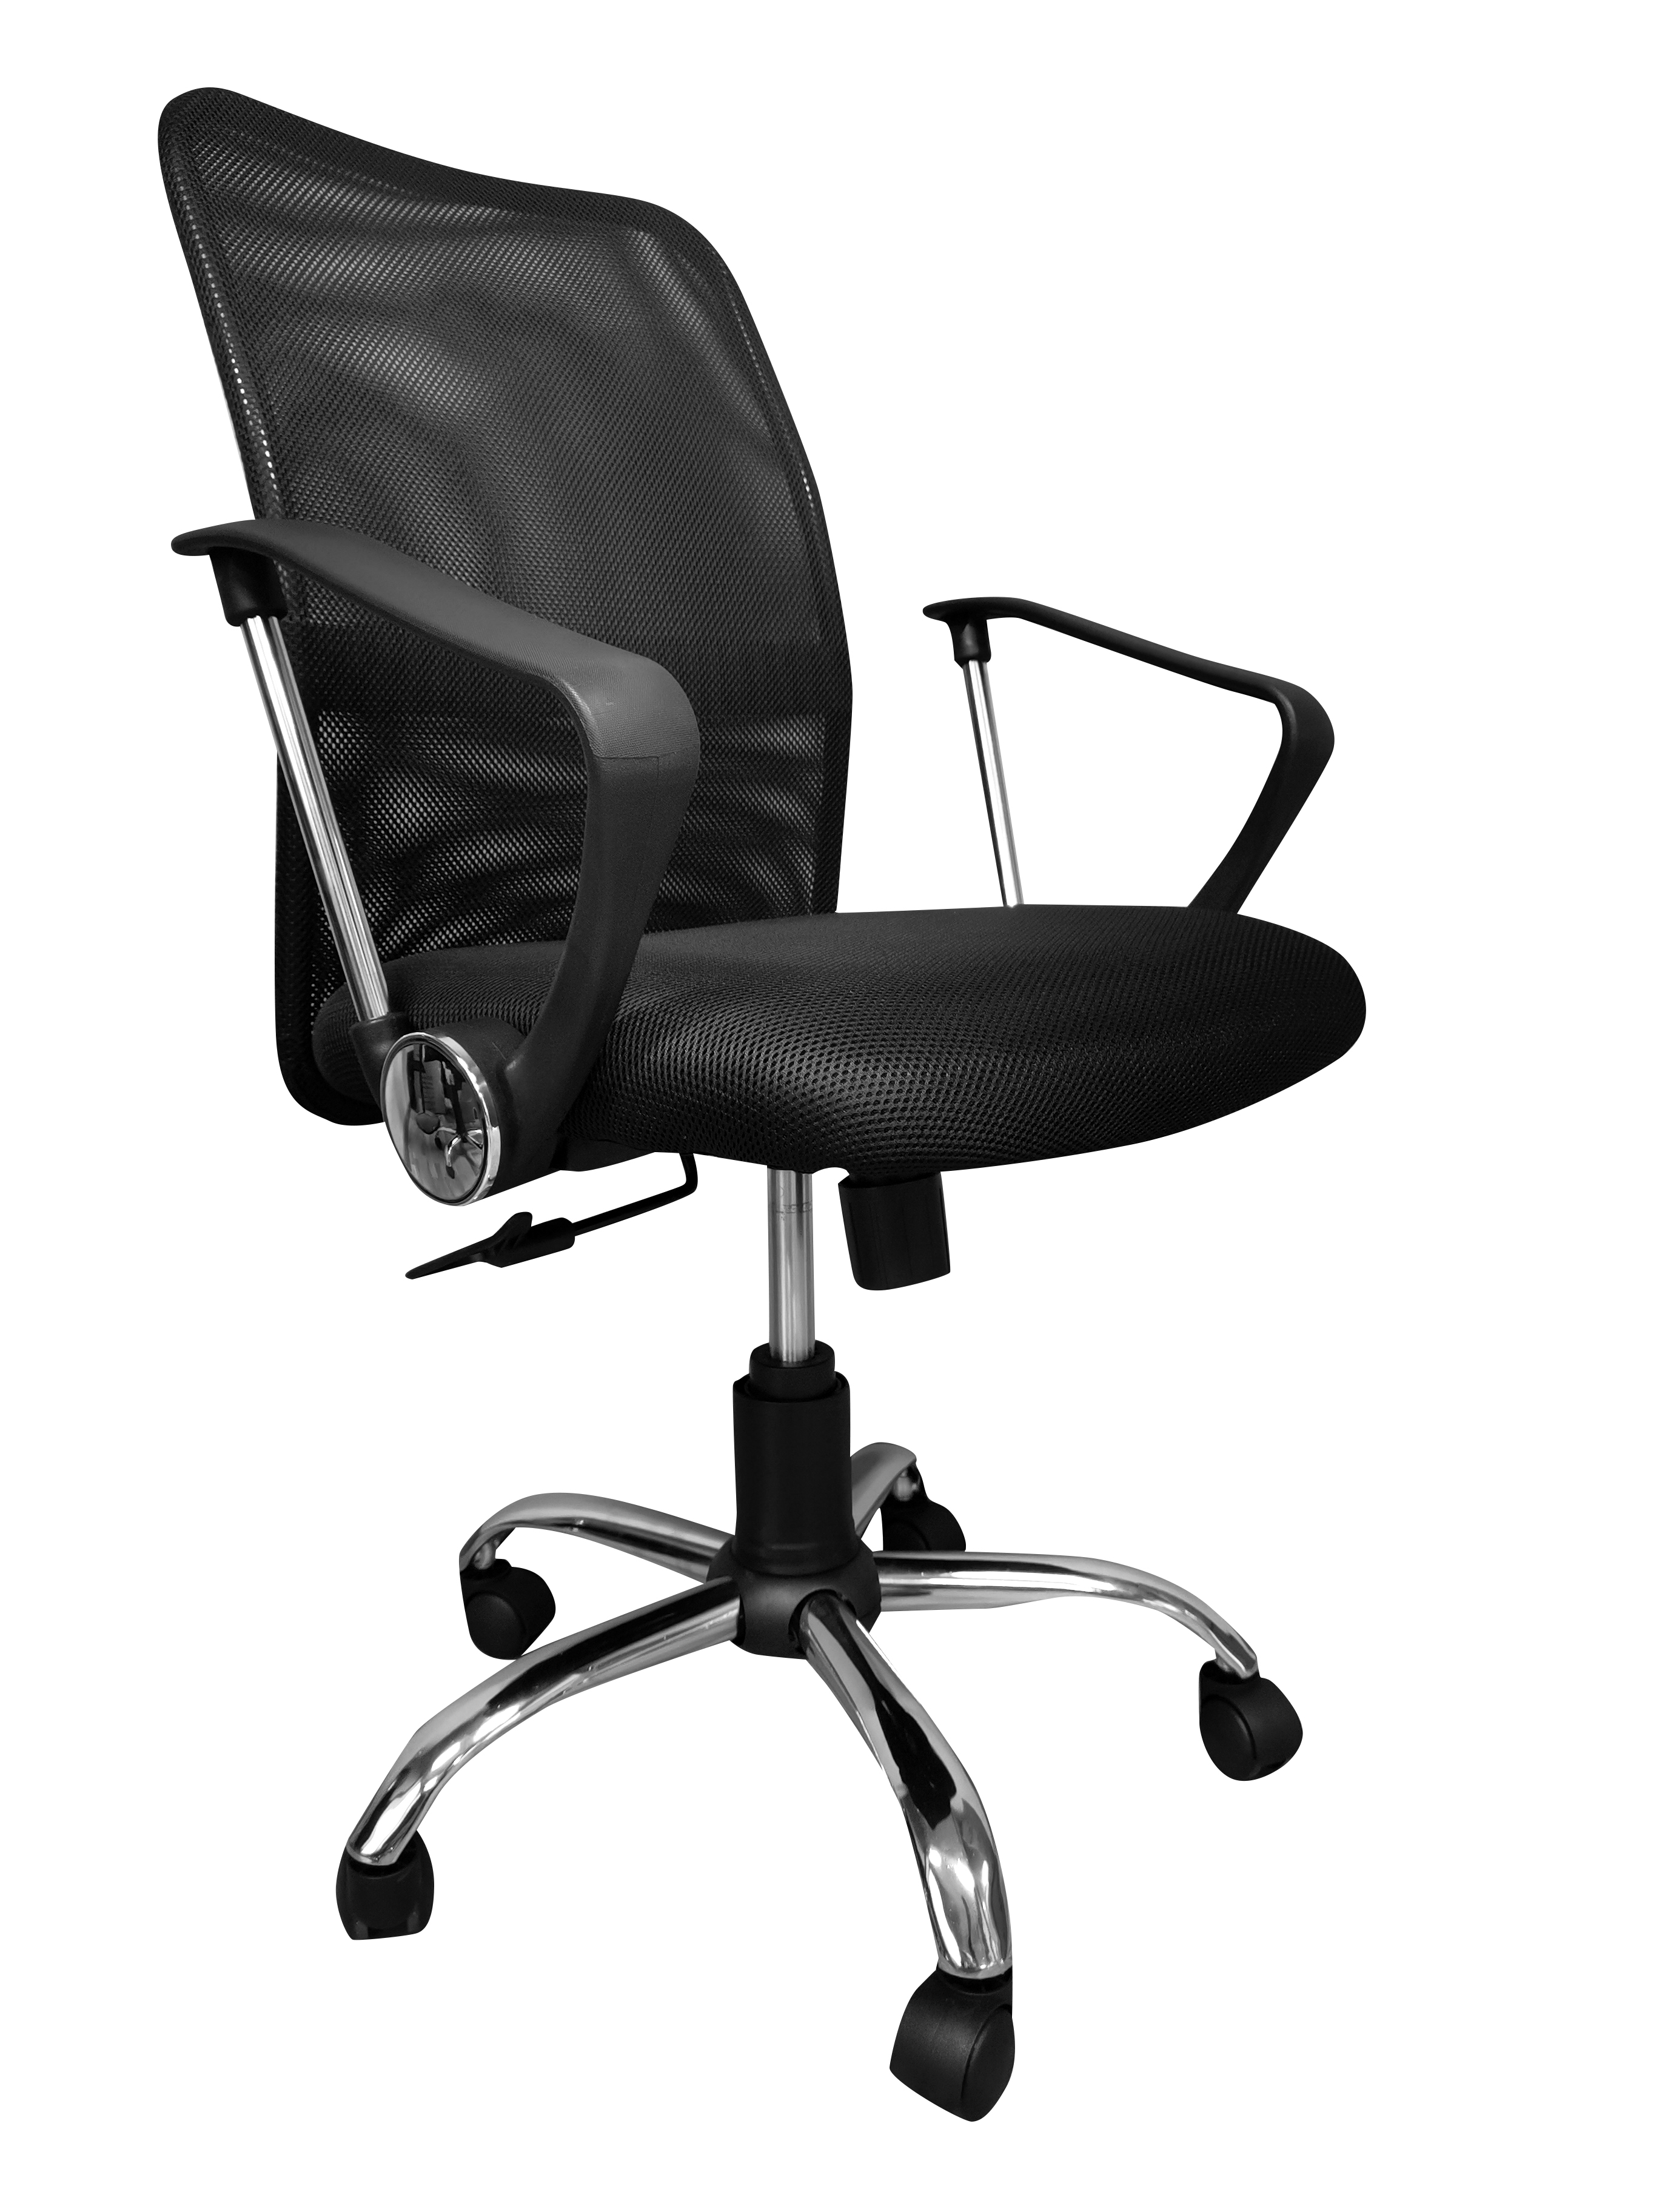 Best-Selling Swivel Gaming Chair - Mid Back Economical Best Home Office Chair Under 50 – GDHERO